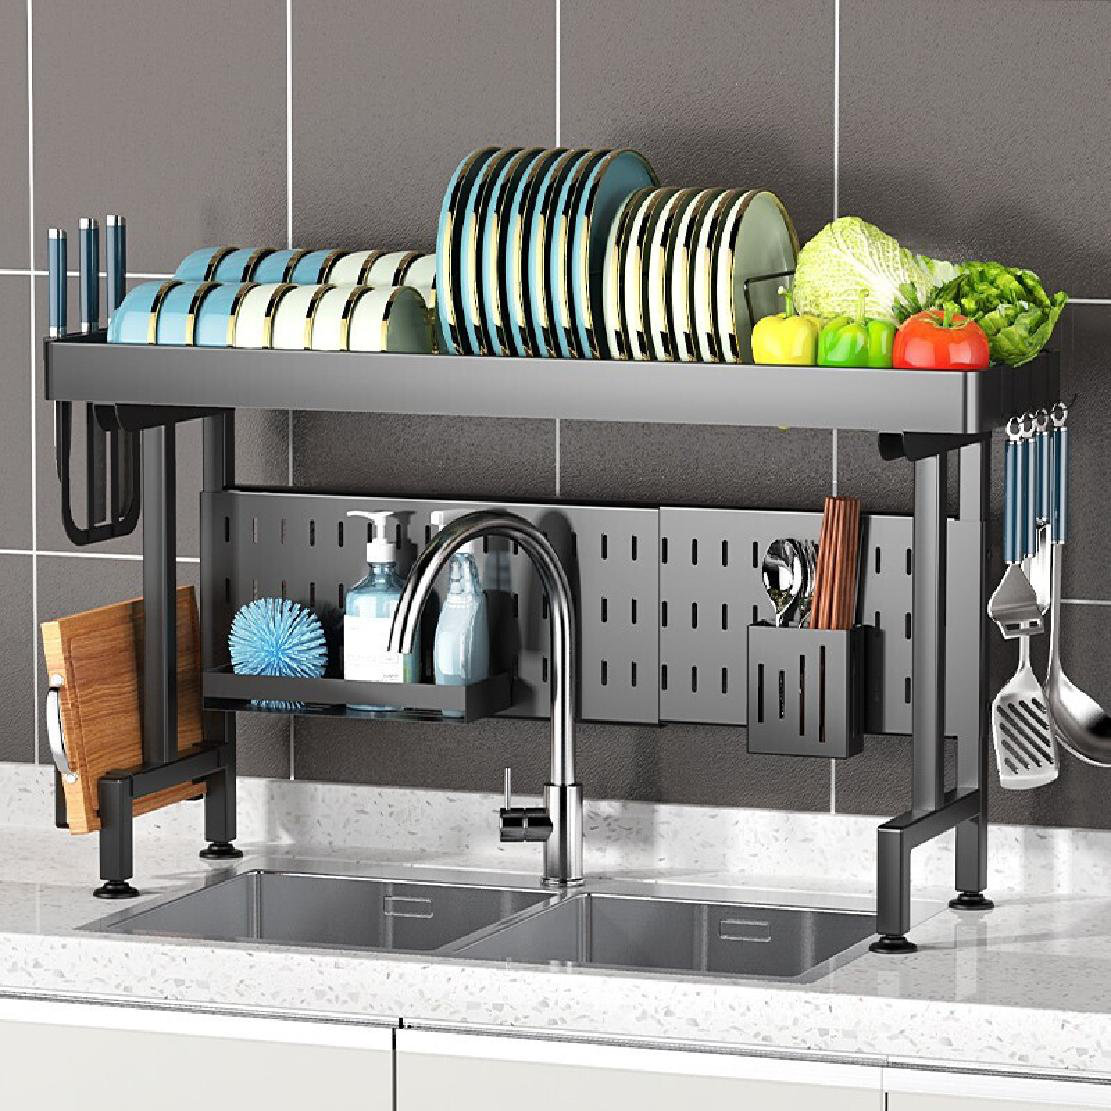  BOOSINY Over The Sink Dish Drying Rack, 2 Tier